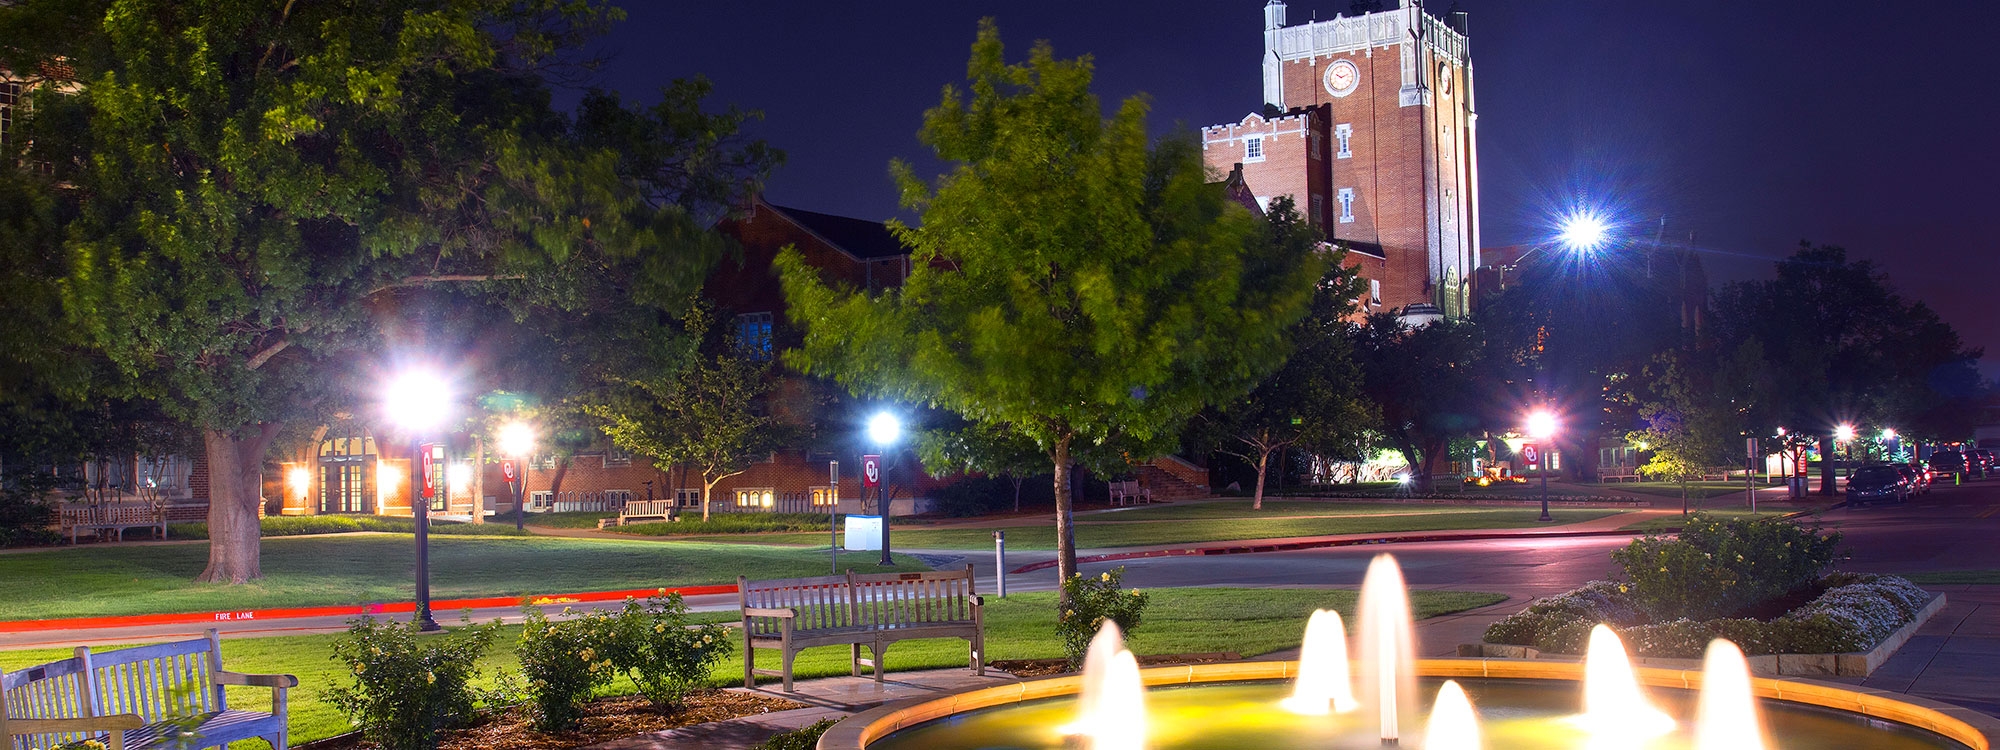 The Oklahoma Memorial Union at night, with trees, benches, and a fountain in the foreground.